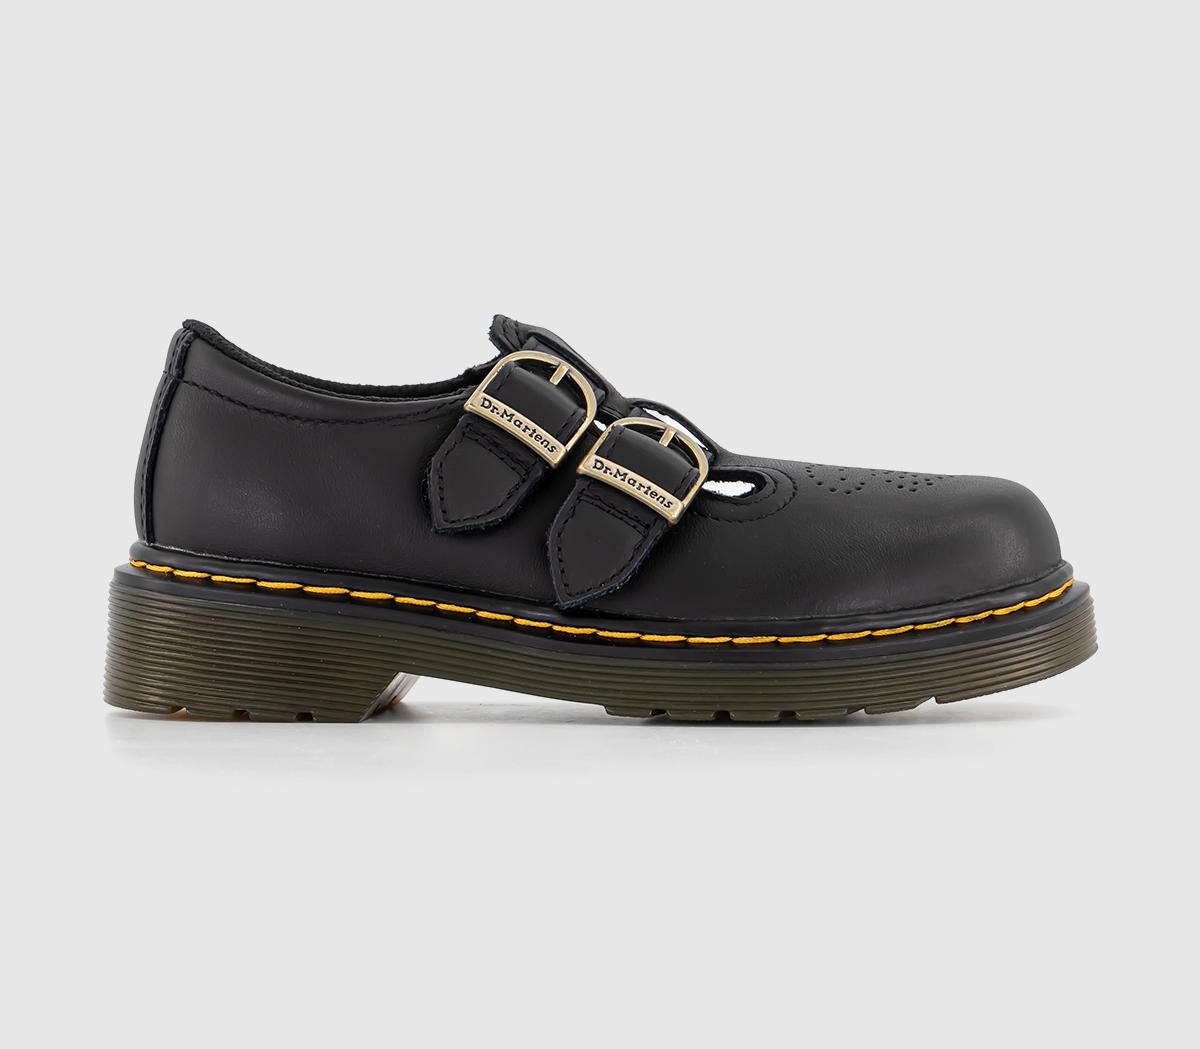 Dr. Martens 8065 Mary Jane Kids Shoes Black - School Shoes and Accessories